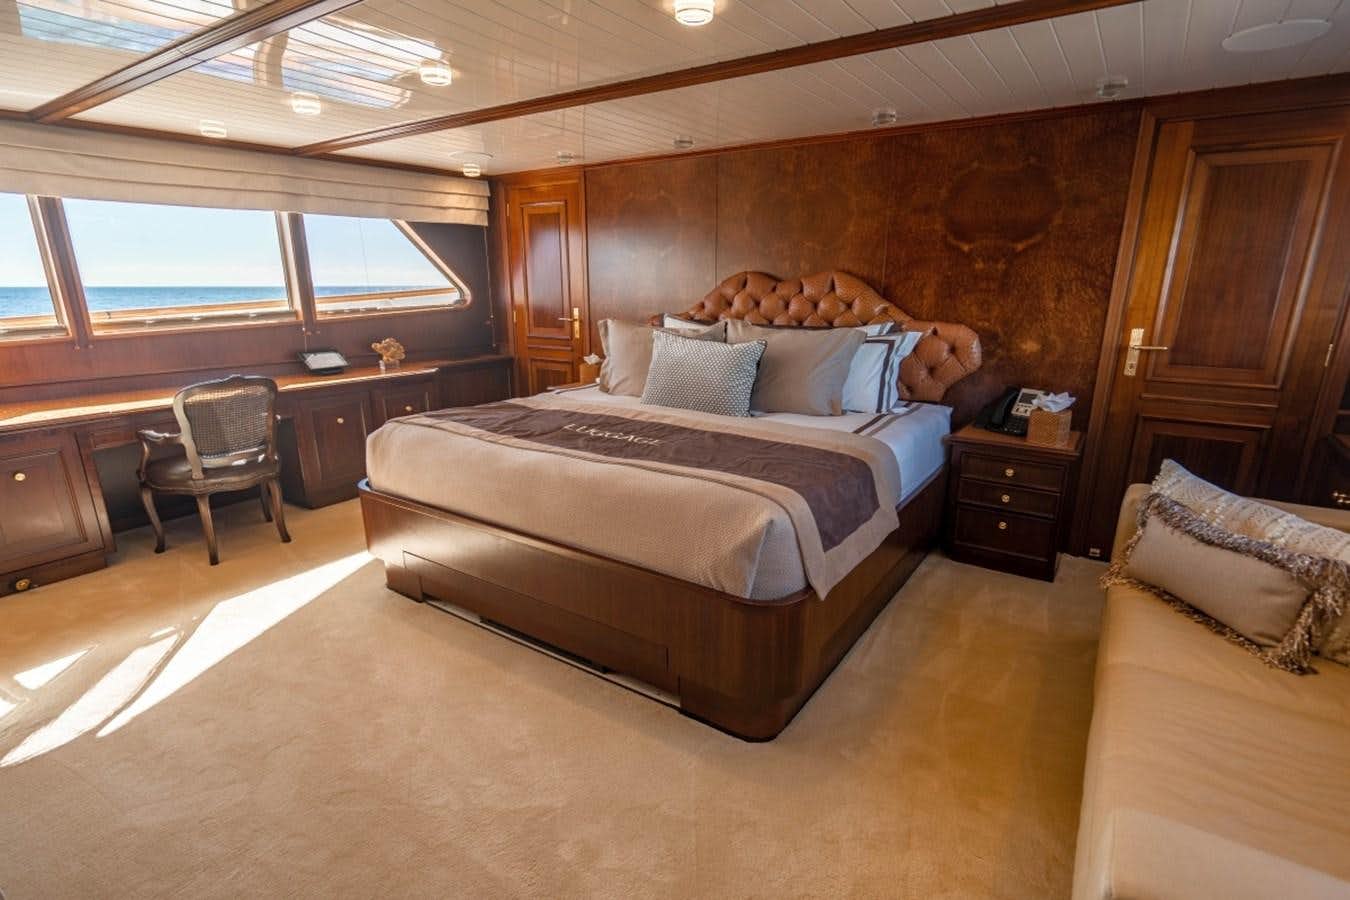 ENDLESS SUMMER Yacht for Sale is a 156' Feadship Motor Yacht